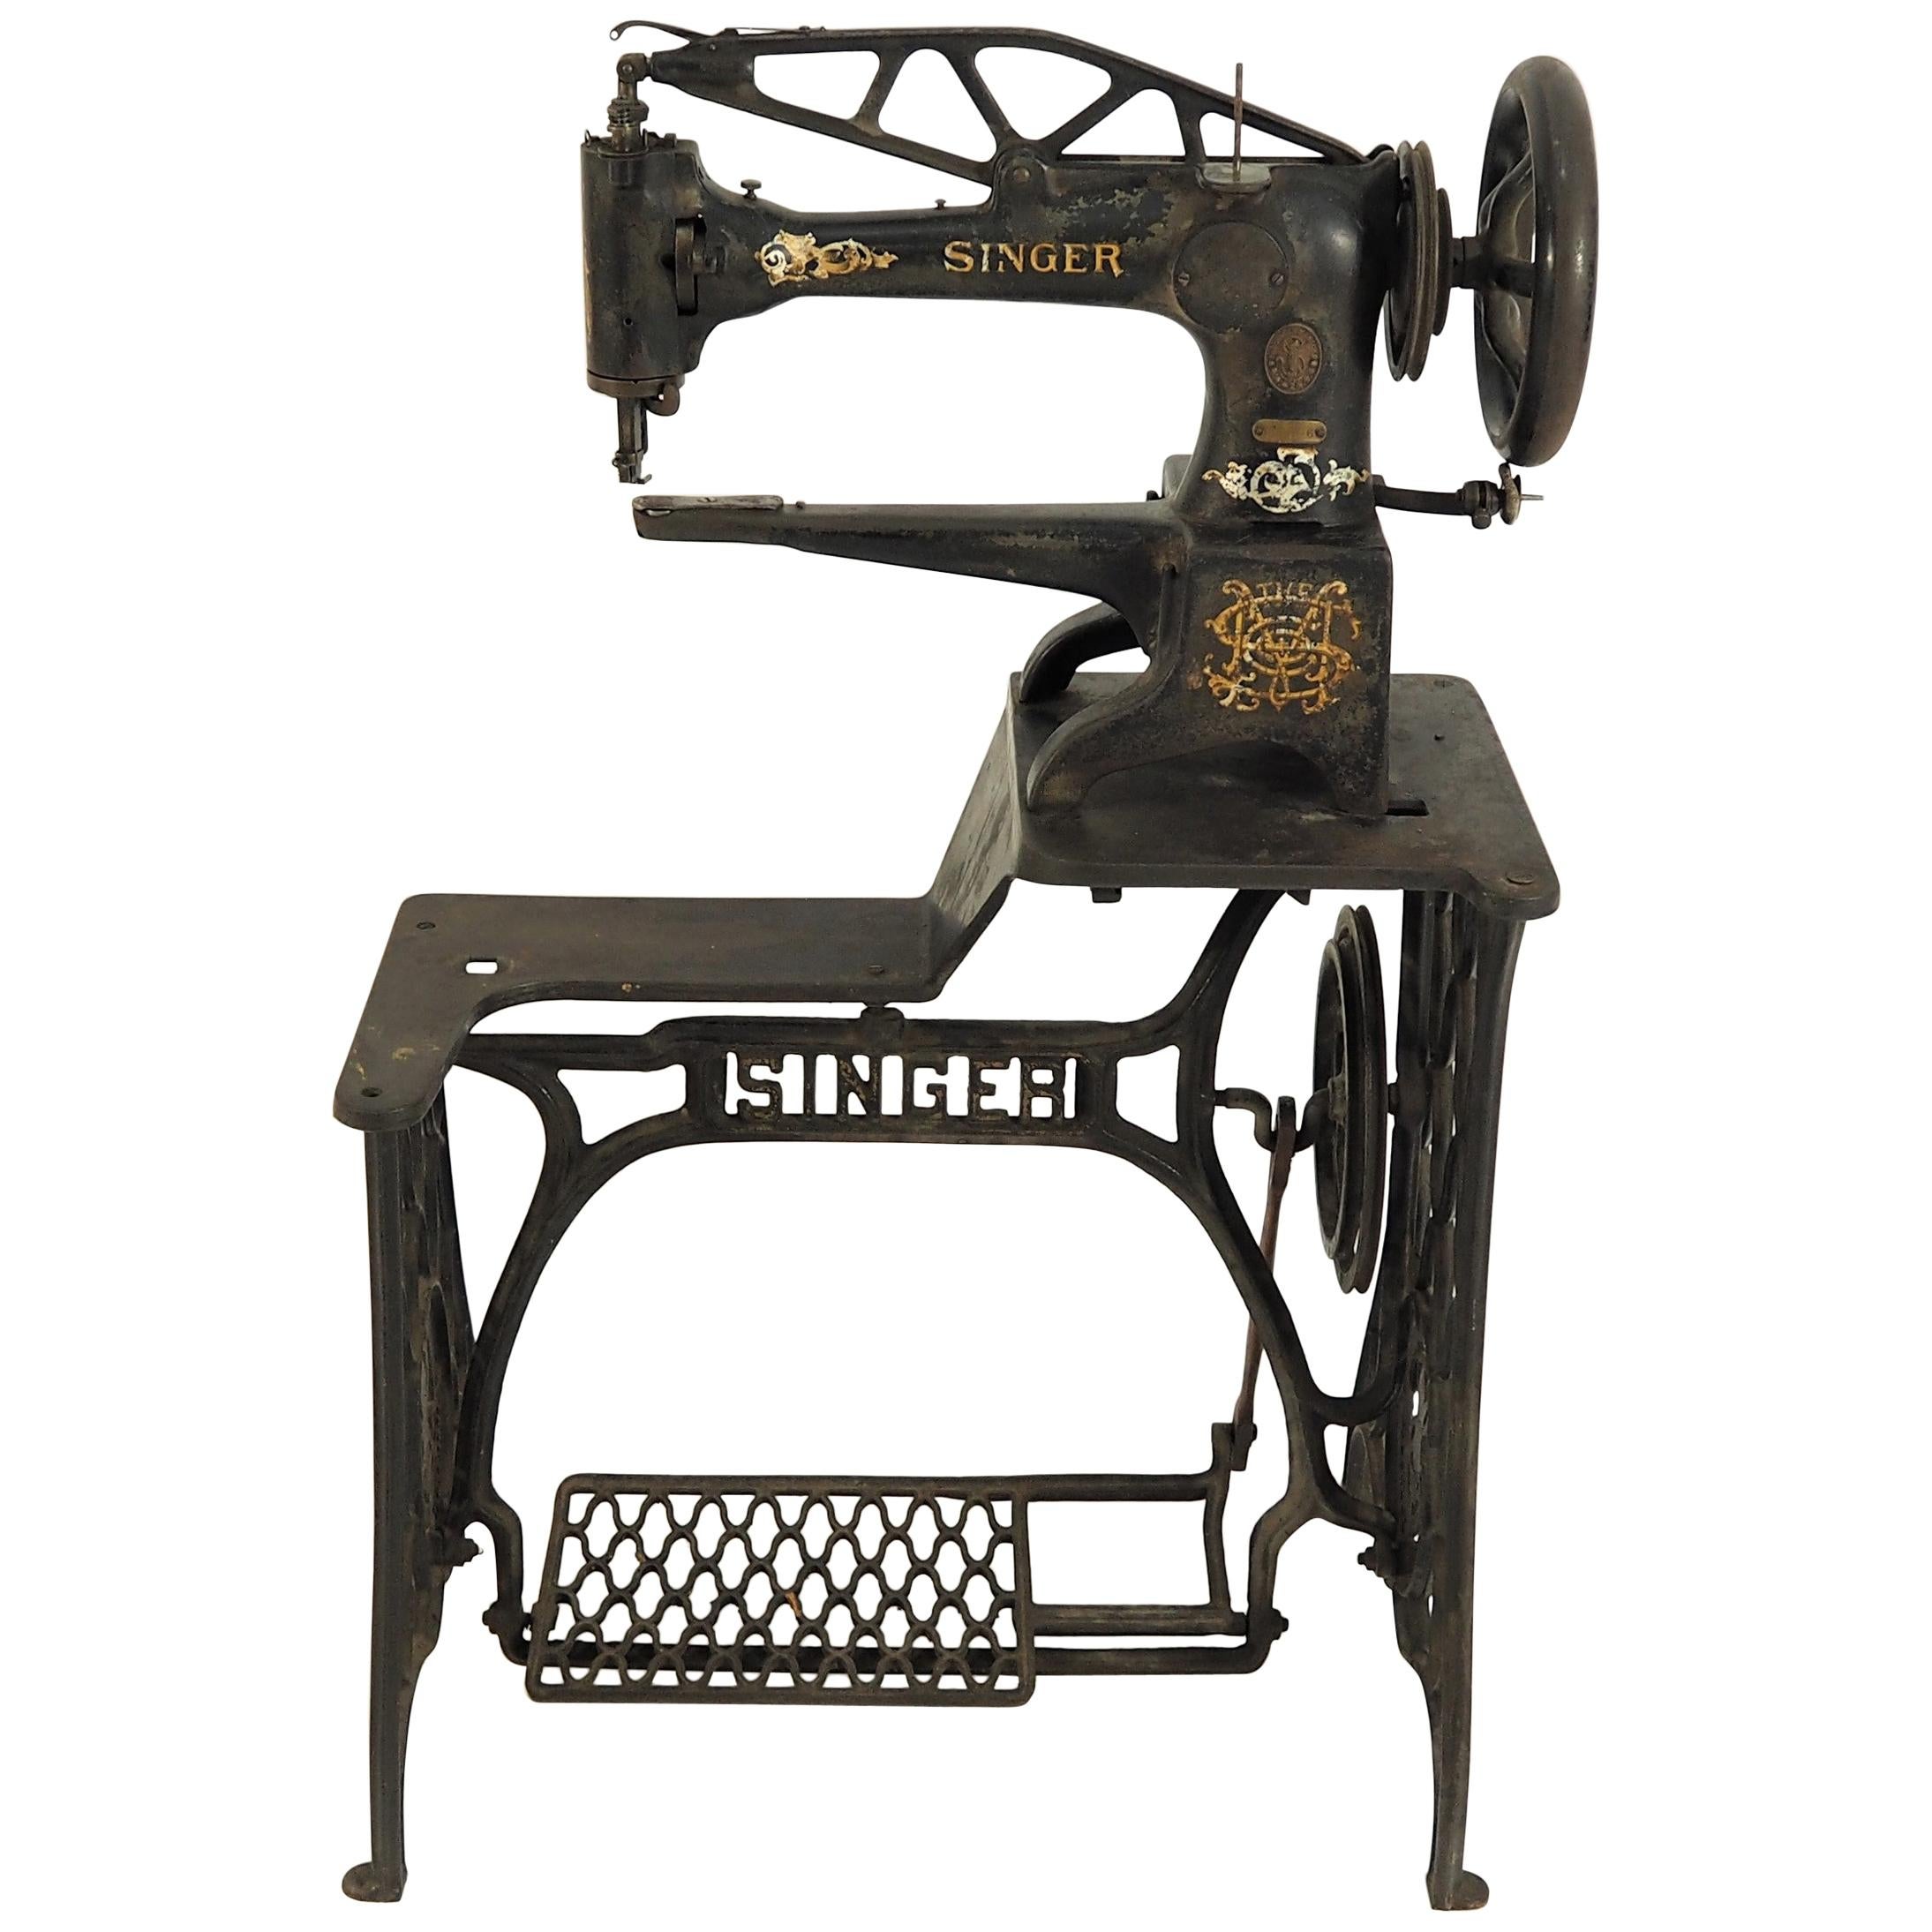 Sewing Machine from Singer, circa 1920s